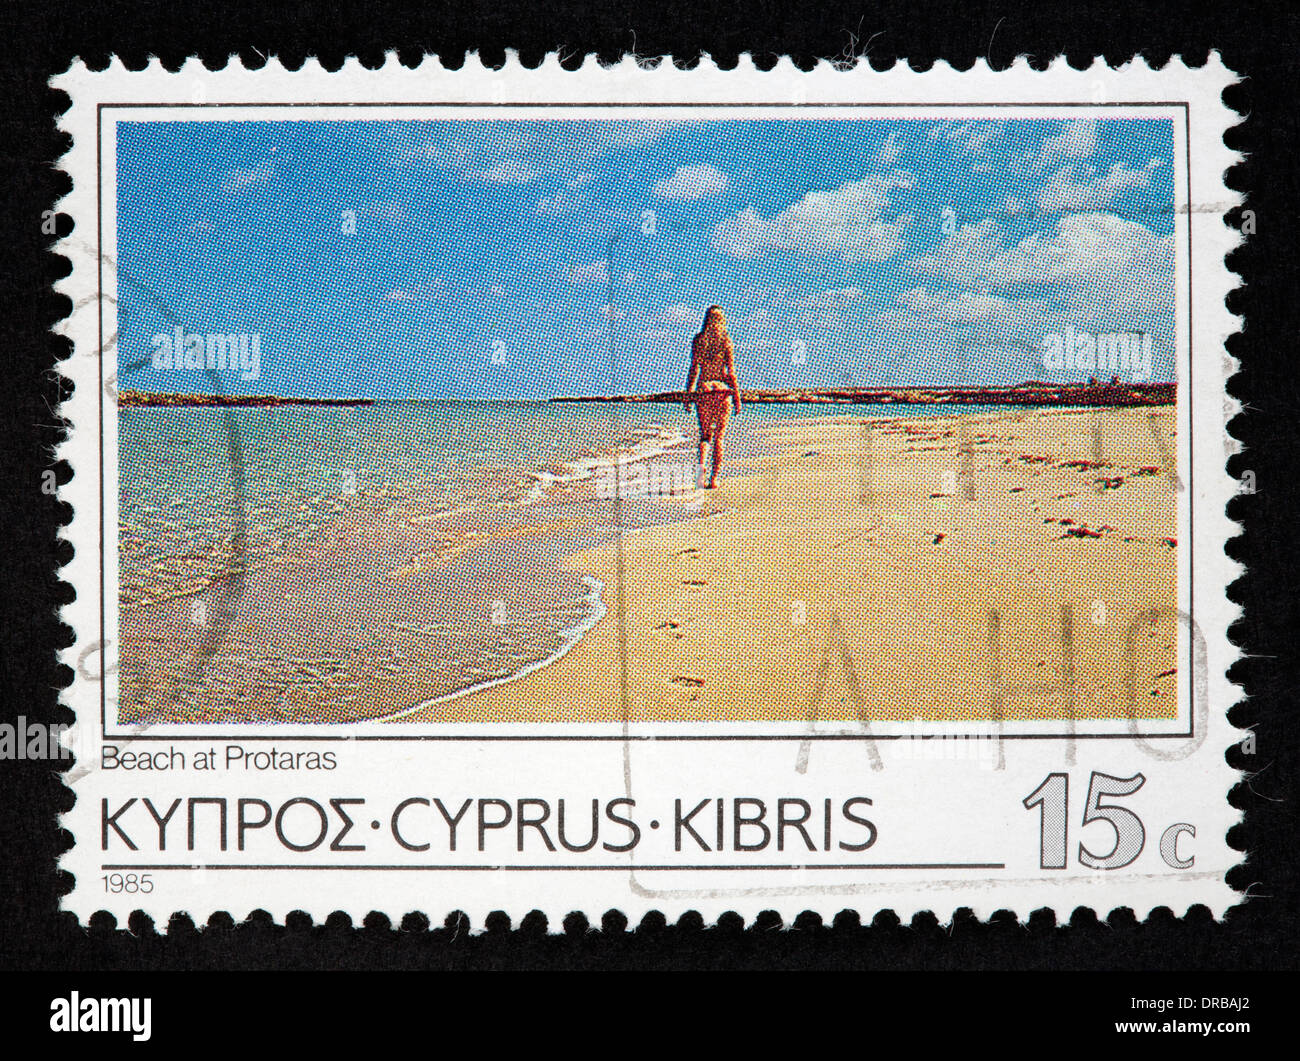 Cypriot postage stamp Stock Photo